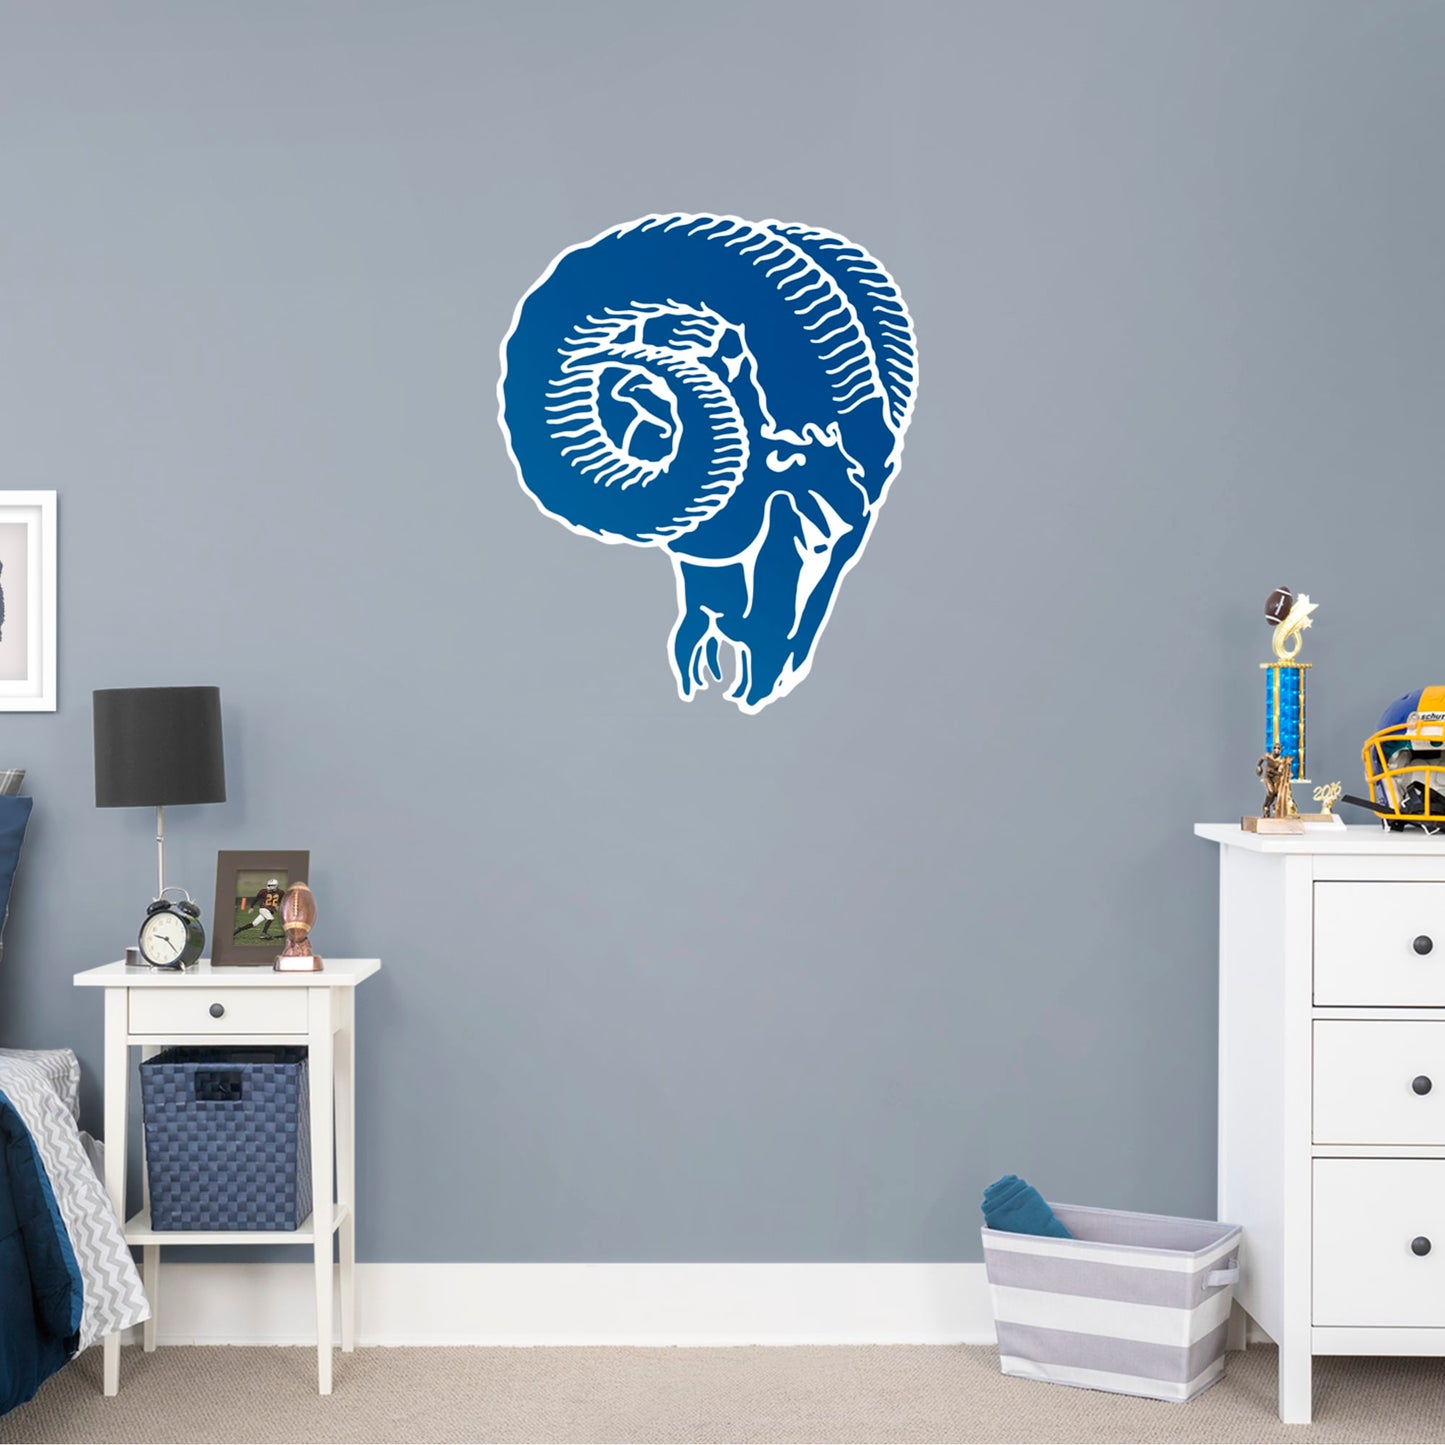 Los Angeles Rams: Classic Logo - Officially Licensed NFL Removable Wall Decal